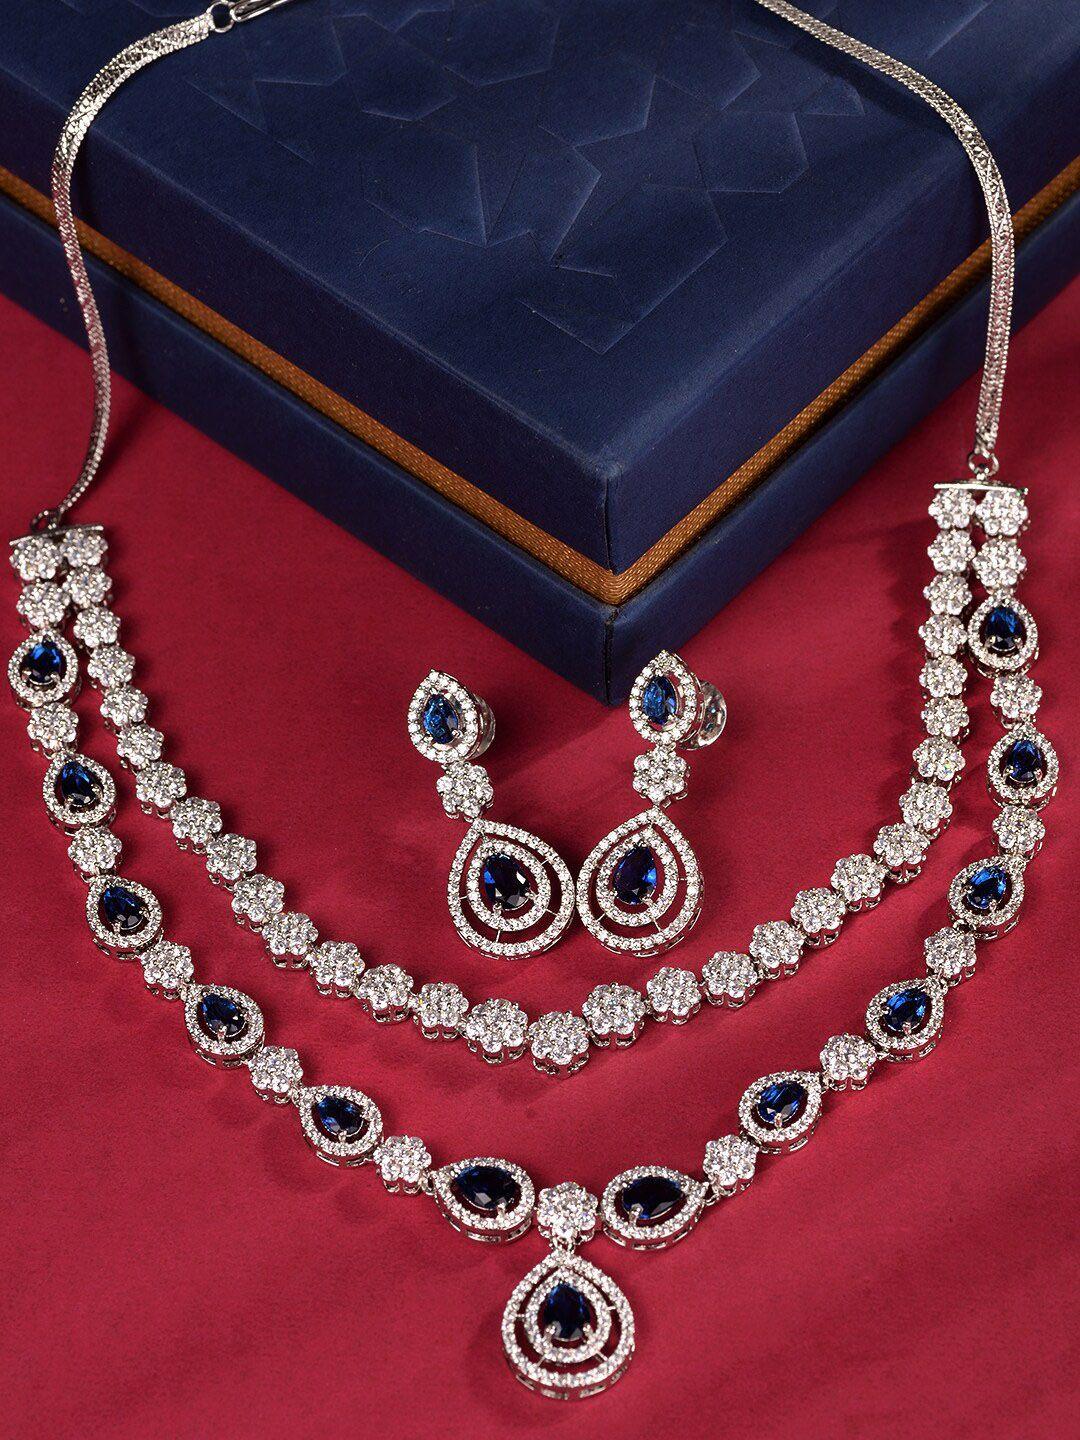 saraf-rs-jewellery-women-silver-plated-ad-studded-necklace-and-earrings